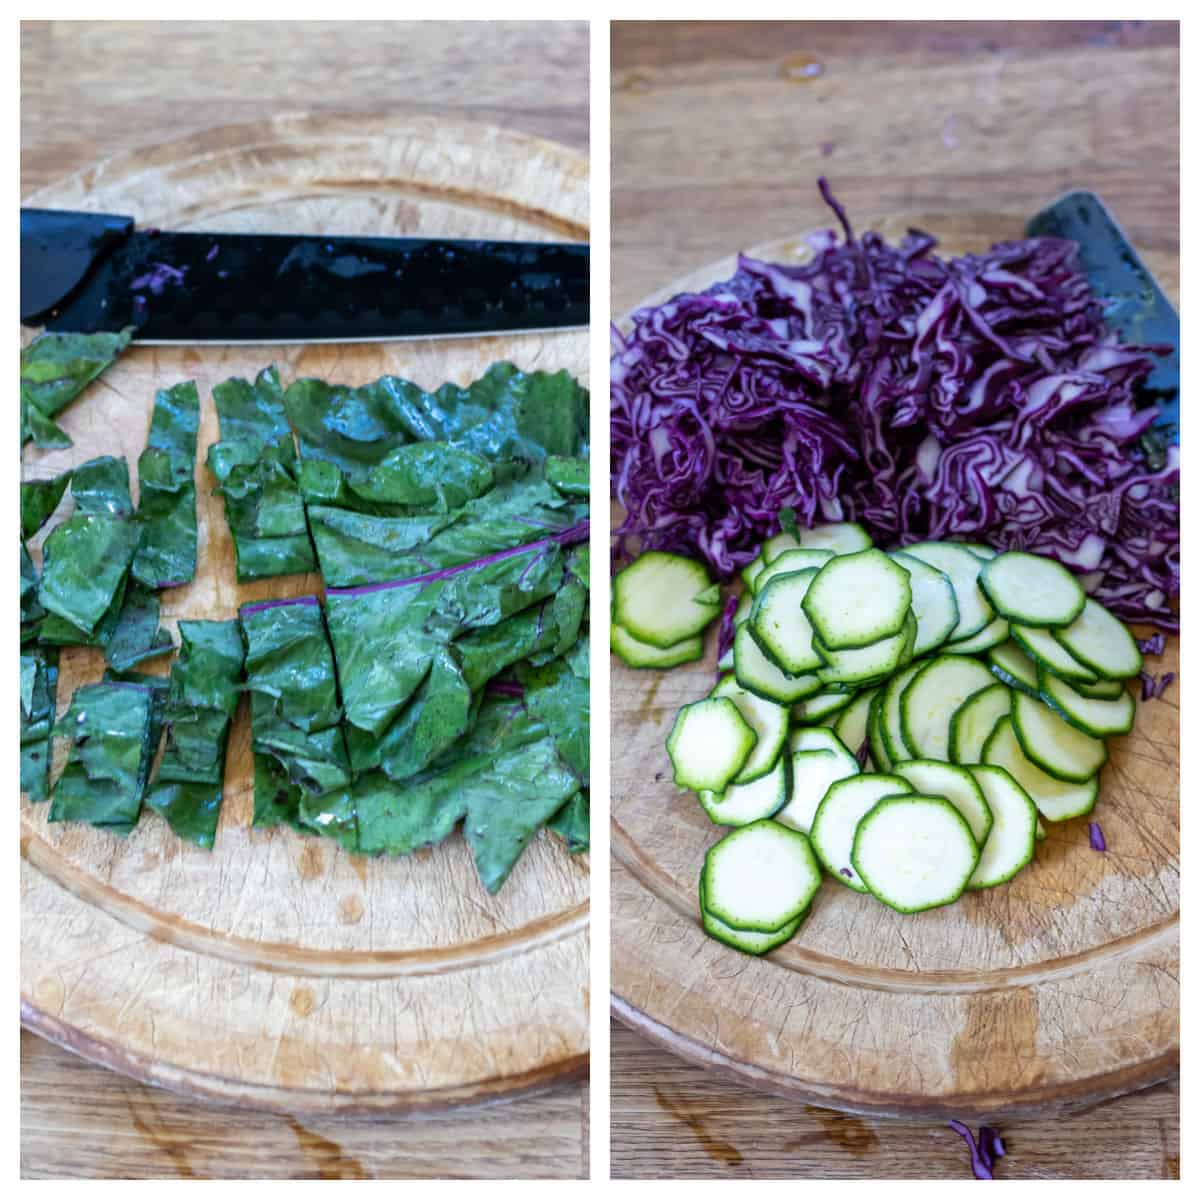 Chopping kohlrabi leaves, red cabbage and zucchini.